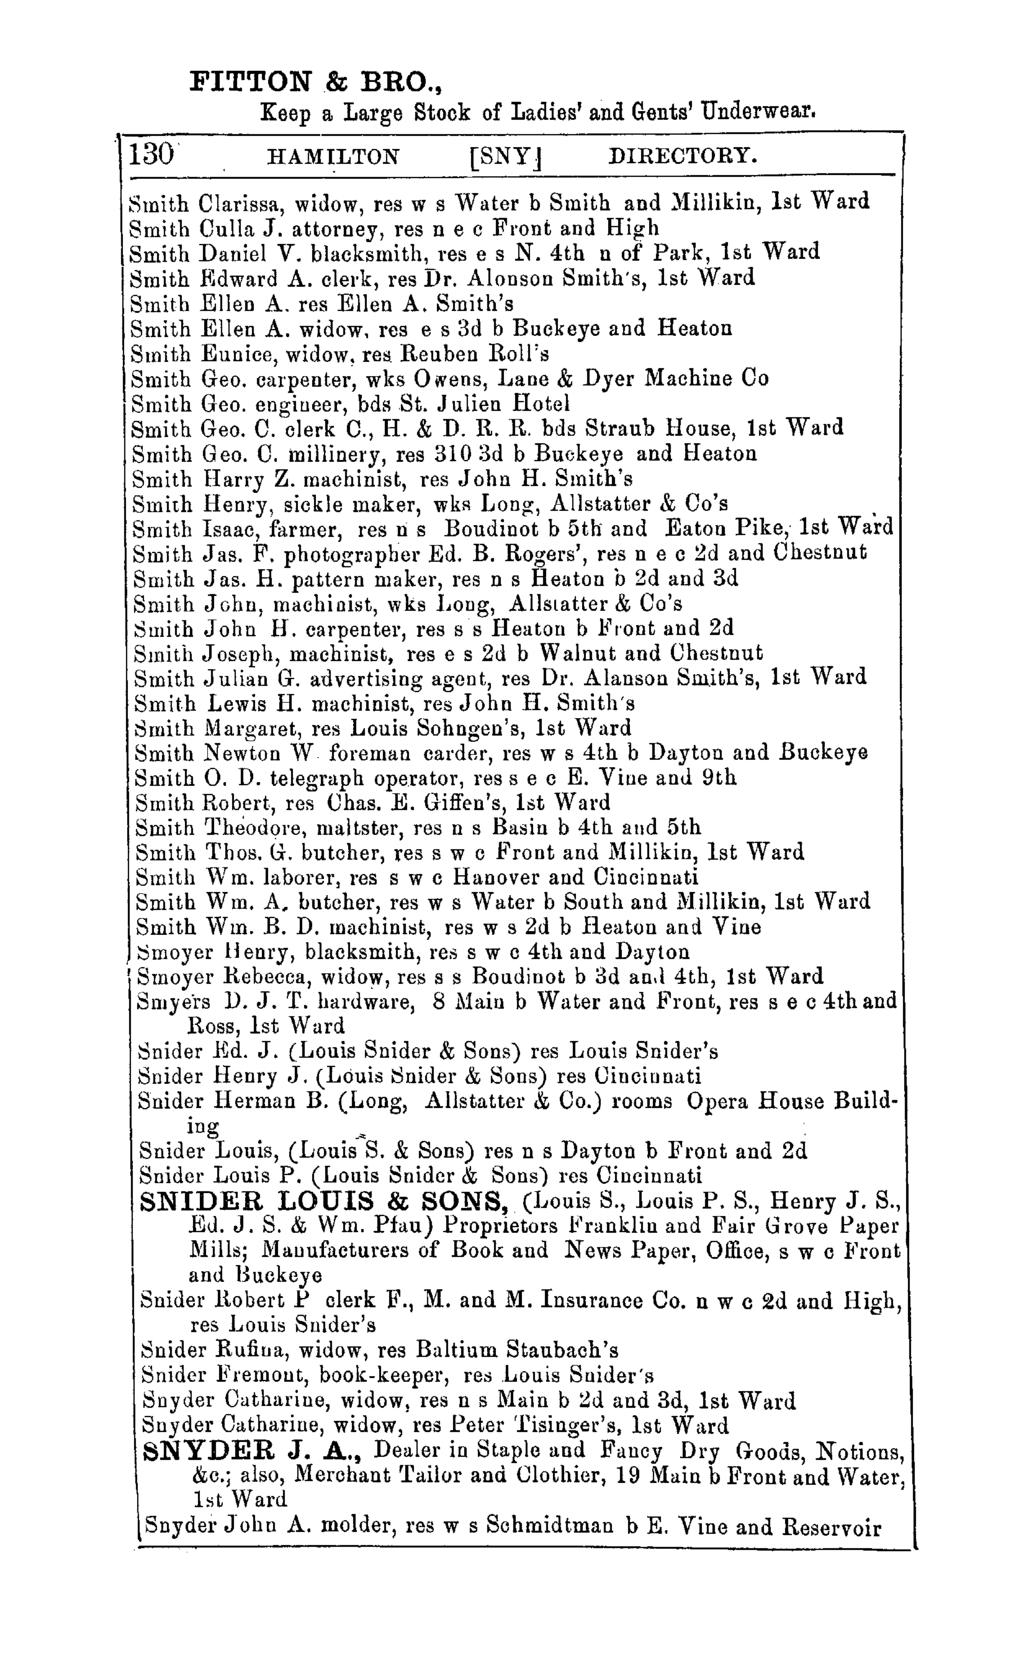 FITTON & BRO., Keep a Large Stock of Ladies' and Gents' Underwear. 130 HAMILTON [SNYJ DIRECTORY. Smith Clarissa, widow, res w s vvater b Smith and )lillikin, 1st Ward Smith Culla J.